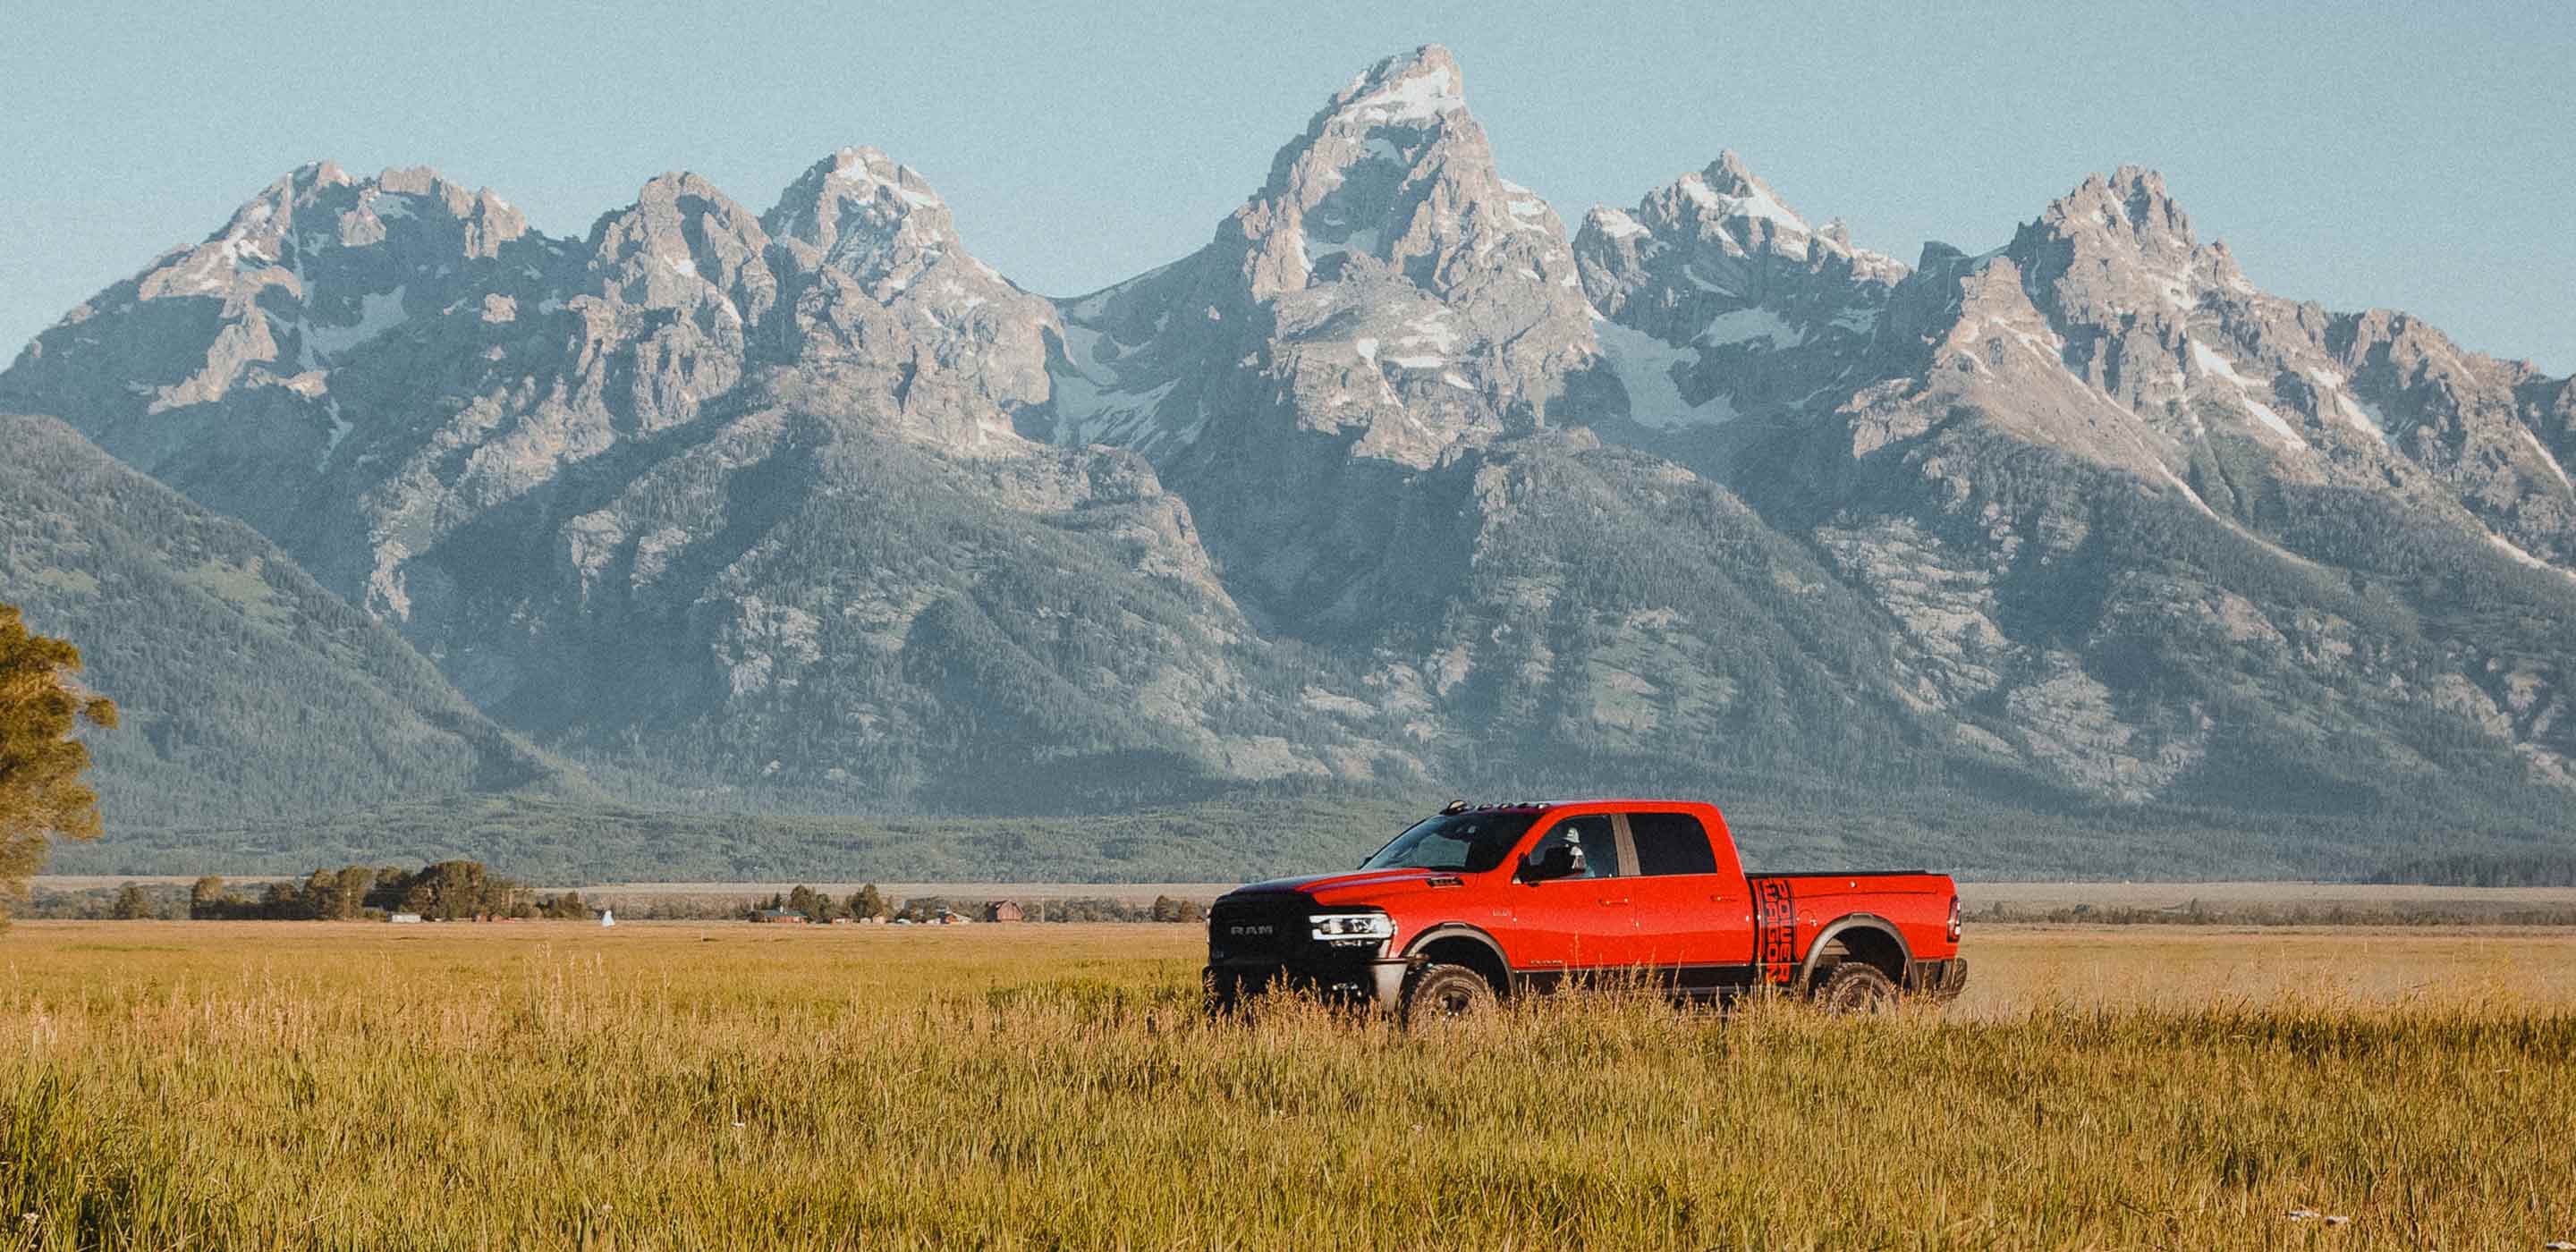 Display The 2022 Ram 2500 parked in tall grass in front of a mountain backdrop.